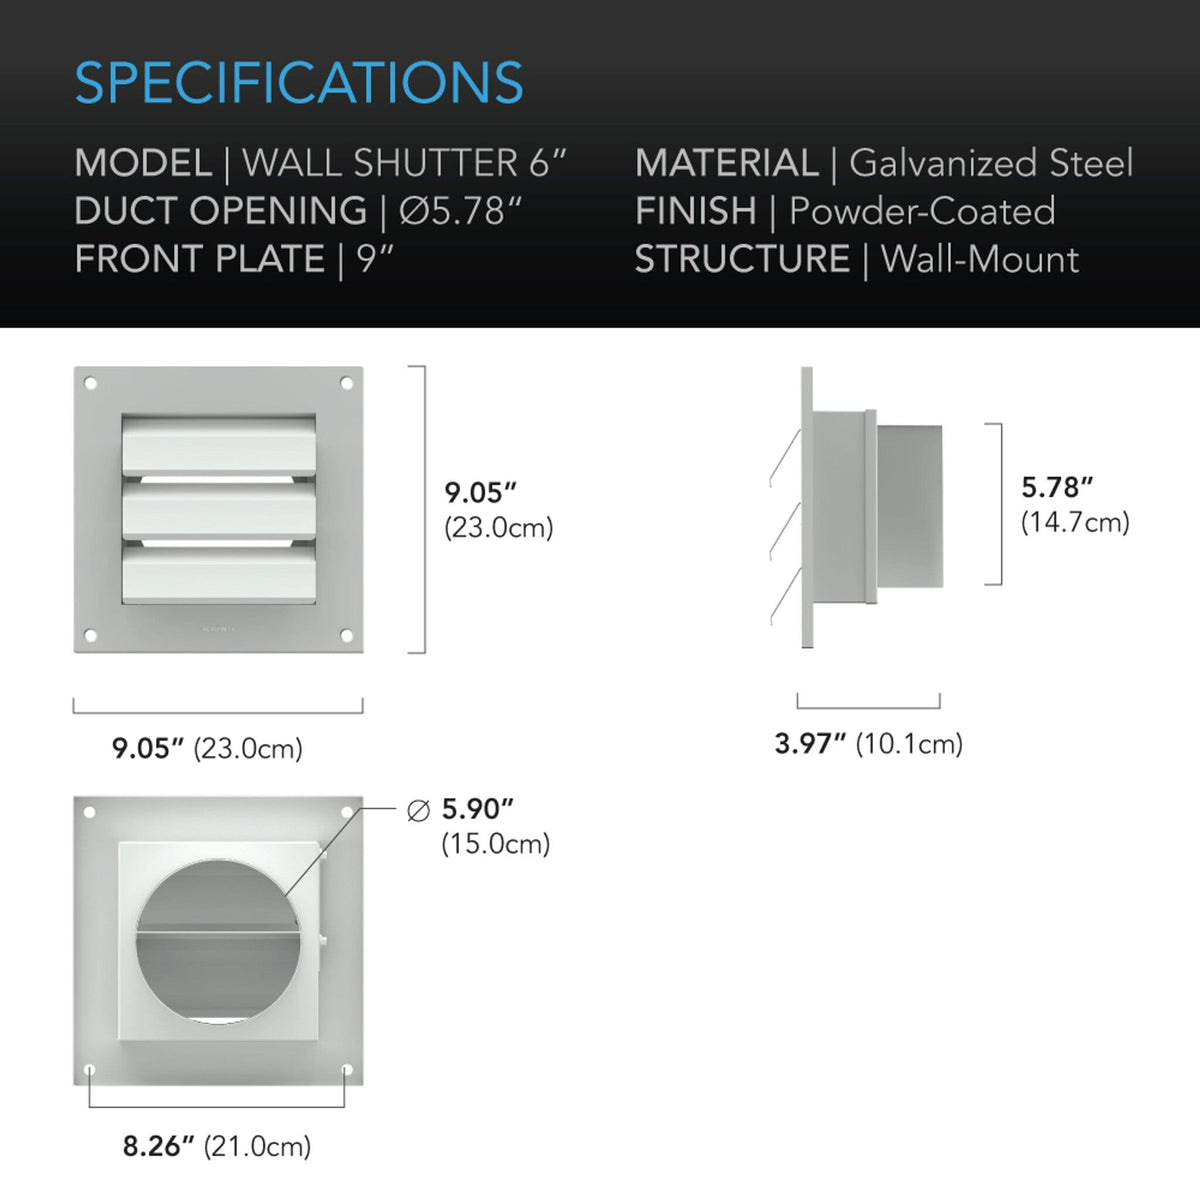 Wall Shutter Grille 6 inch Specifications